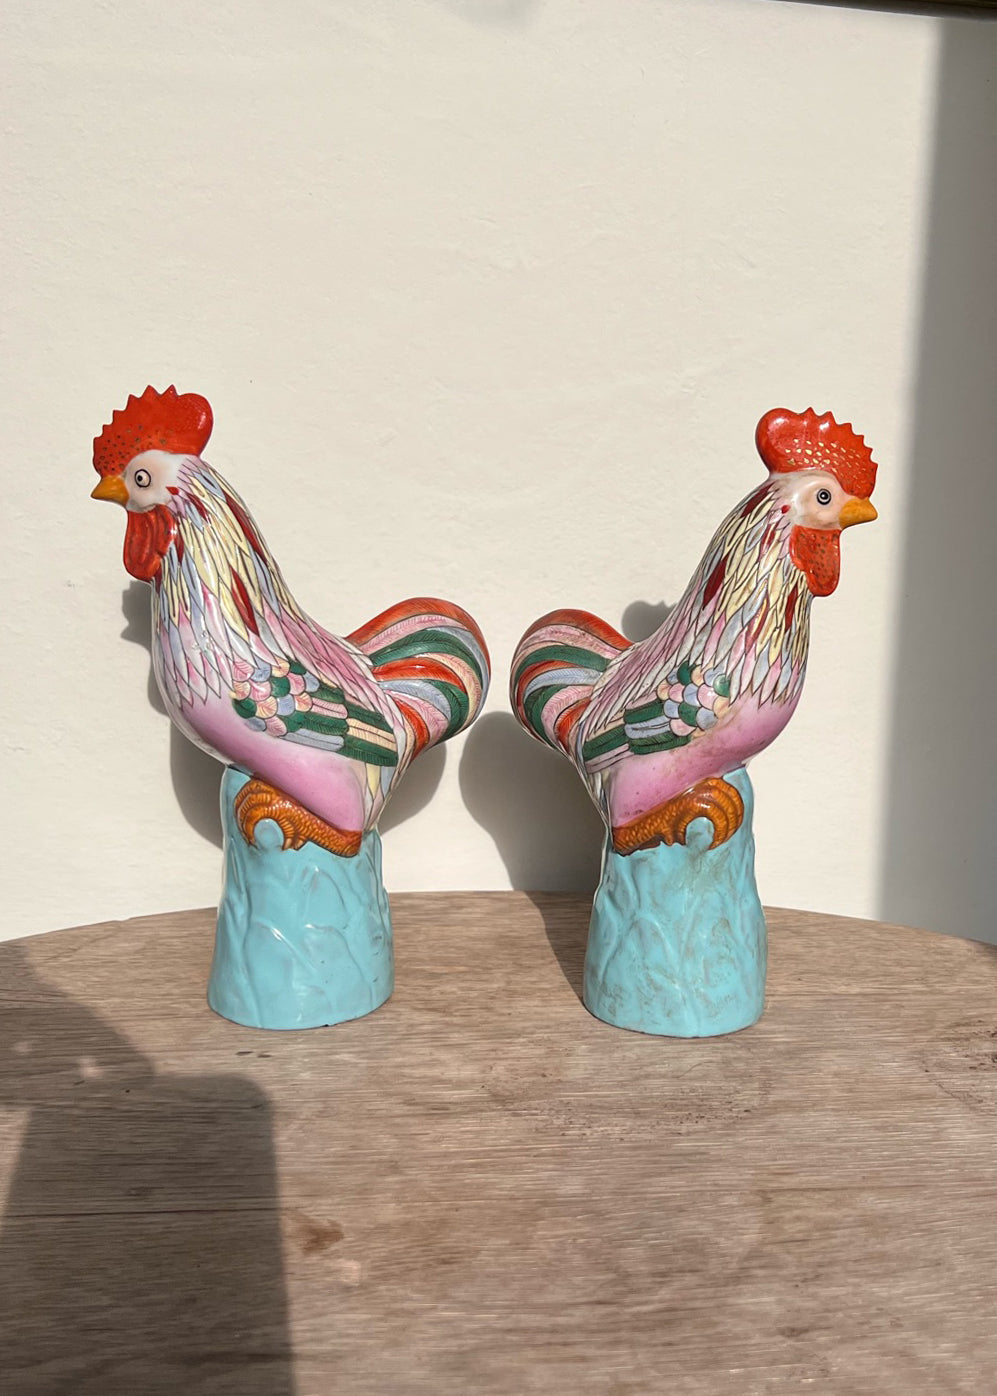 Pair of Chinese Porcelain Roosters Figurines